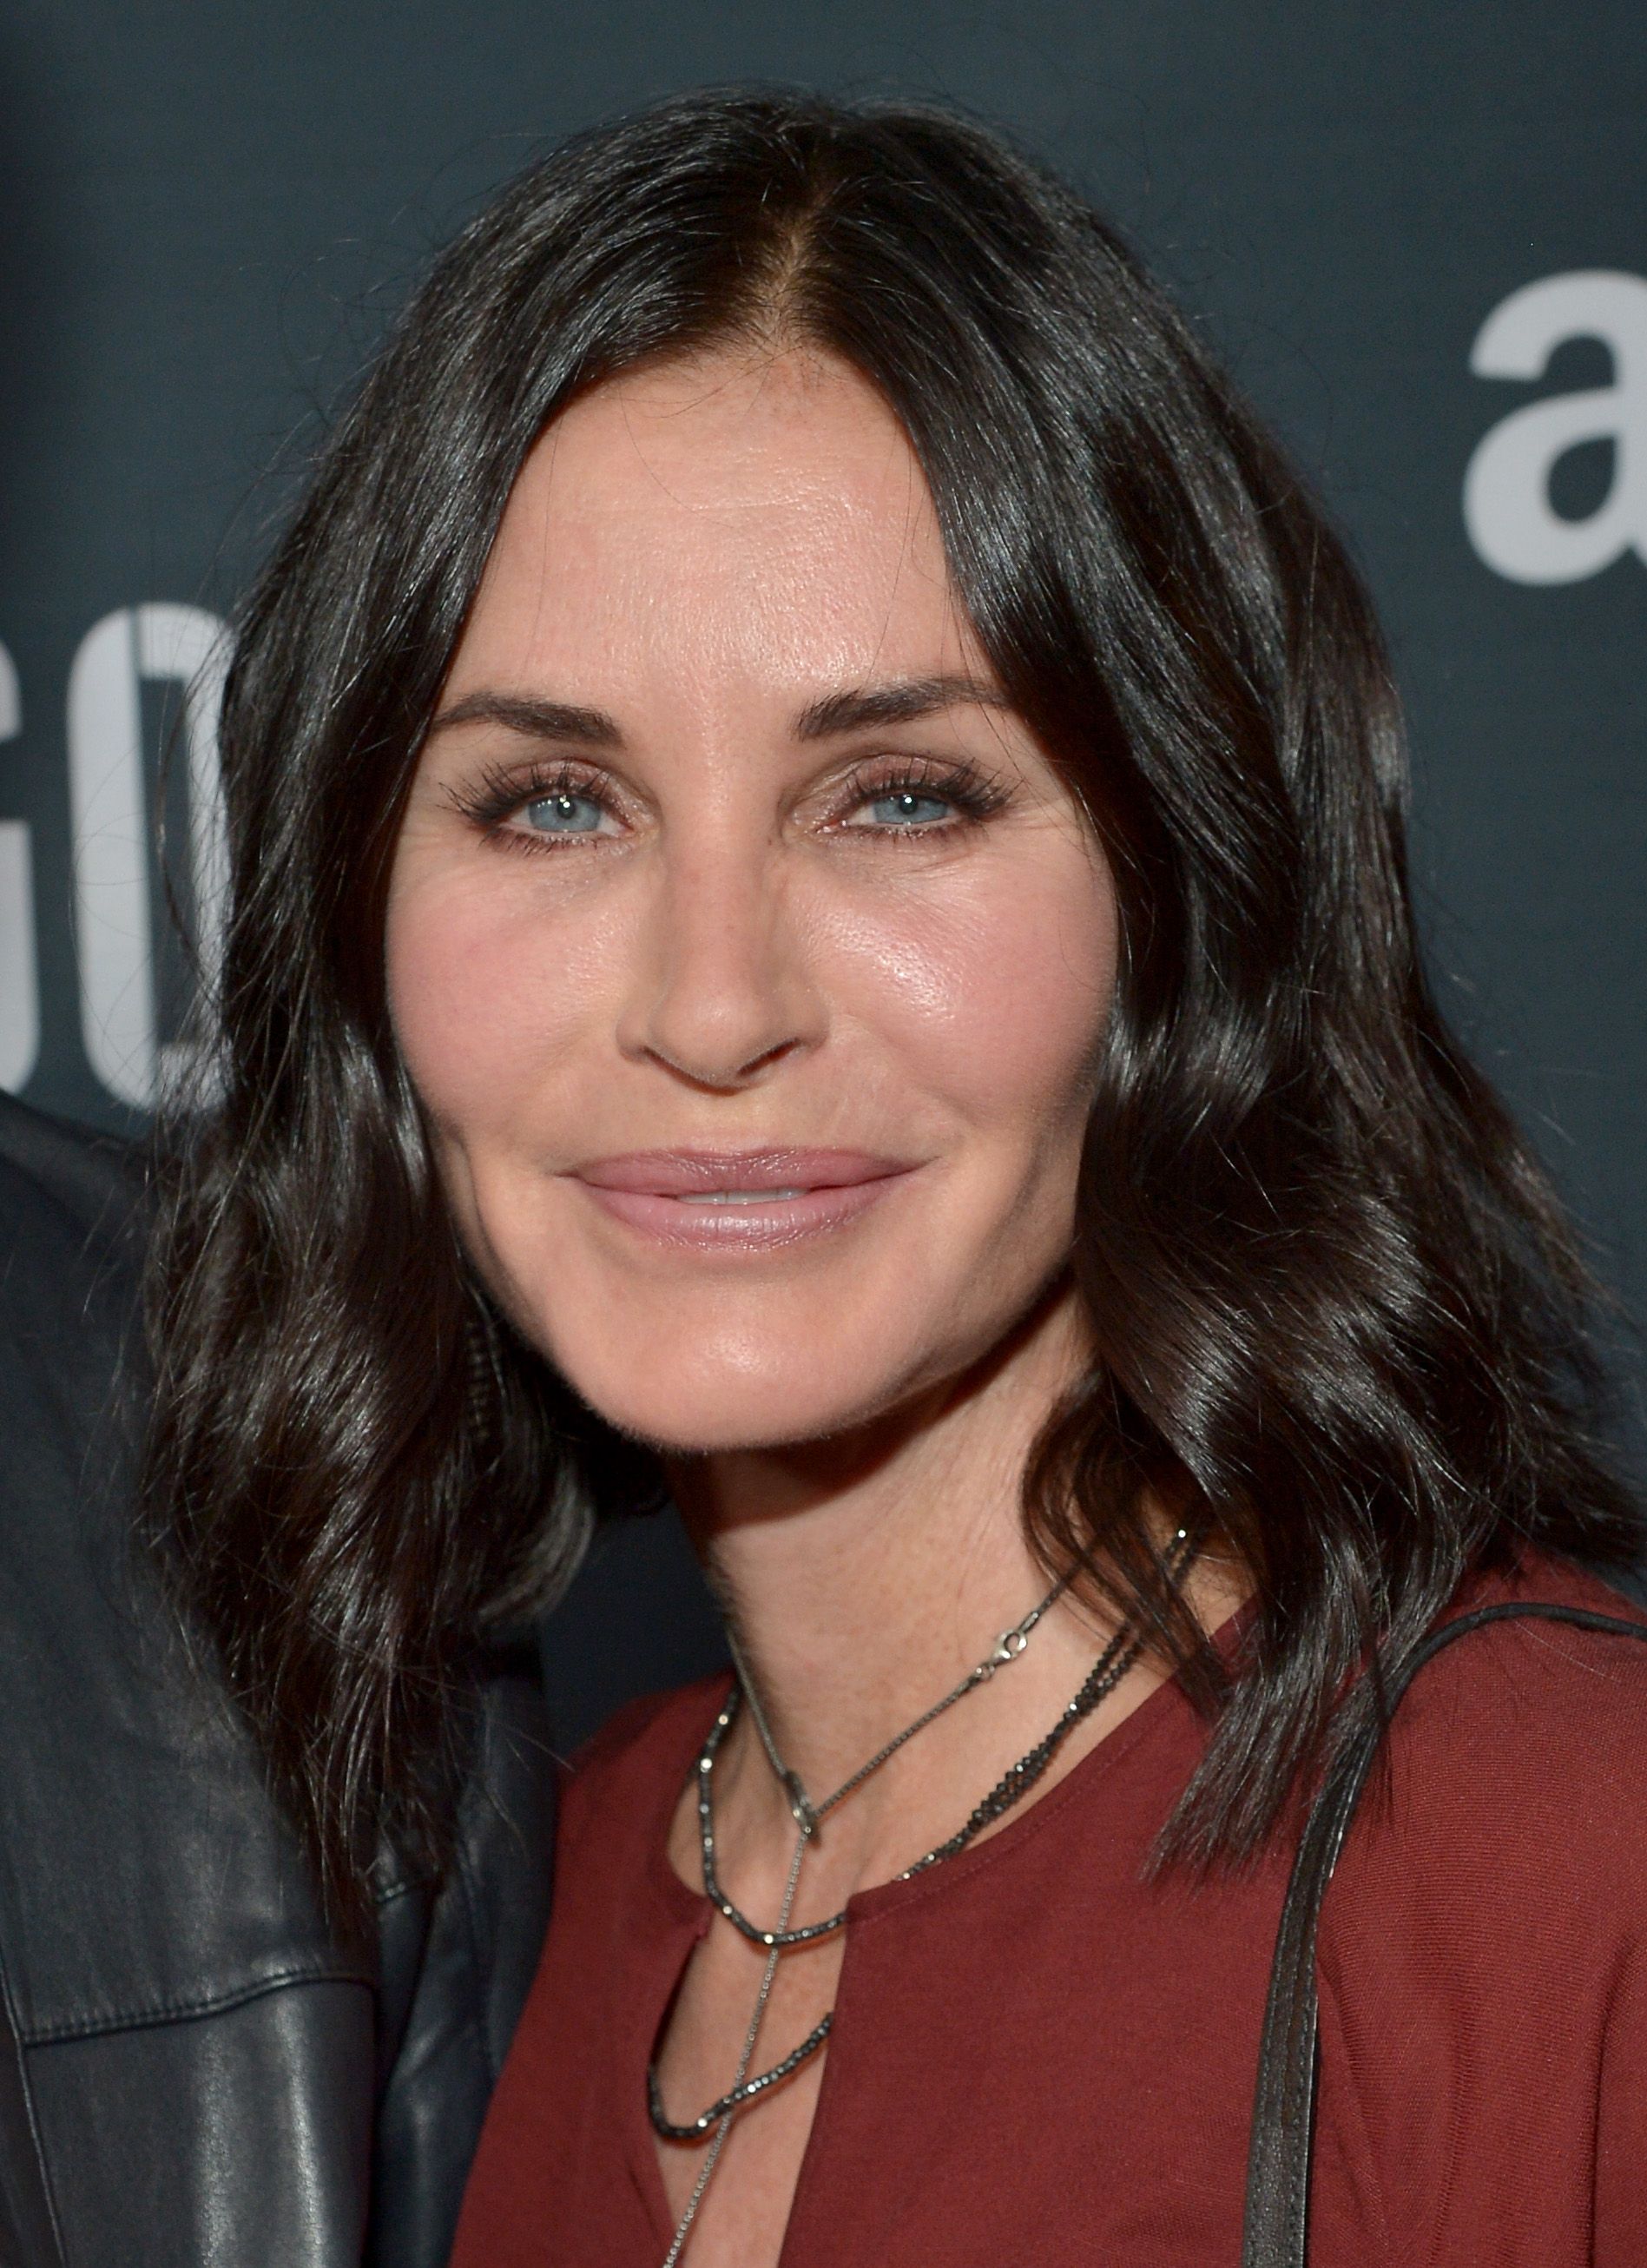 Courteney Cox during the Amazon premiere screening for "Hand Of God" at The Theatre at Ace Hotel on August 19, 2015, in Los Angeles, California. | Source: Getty Images